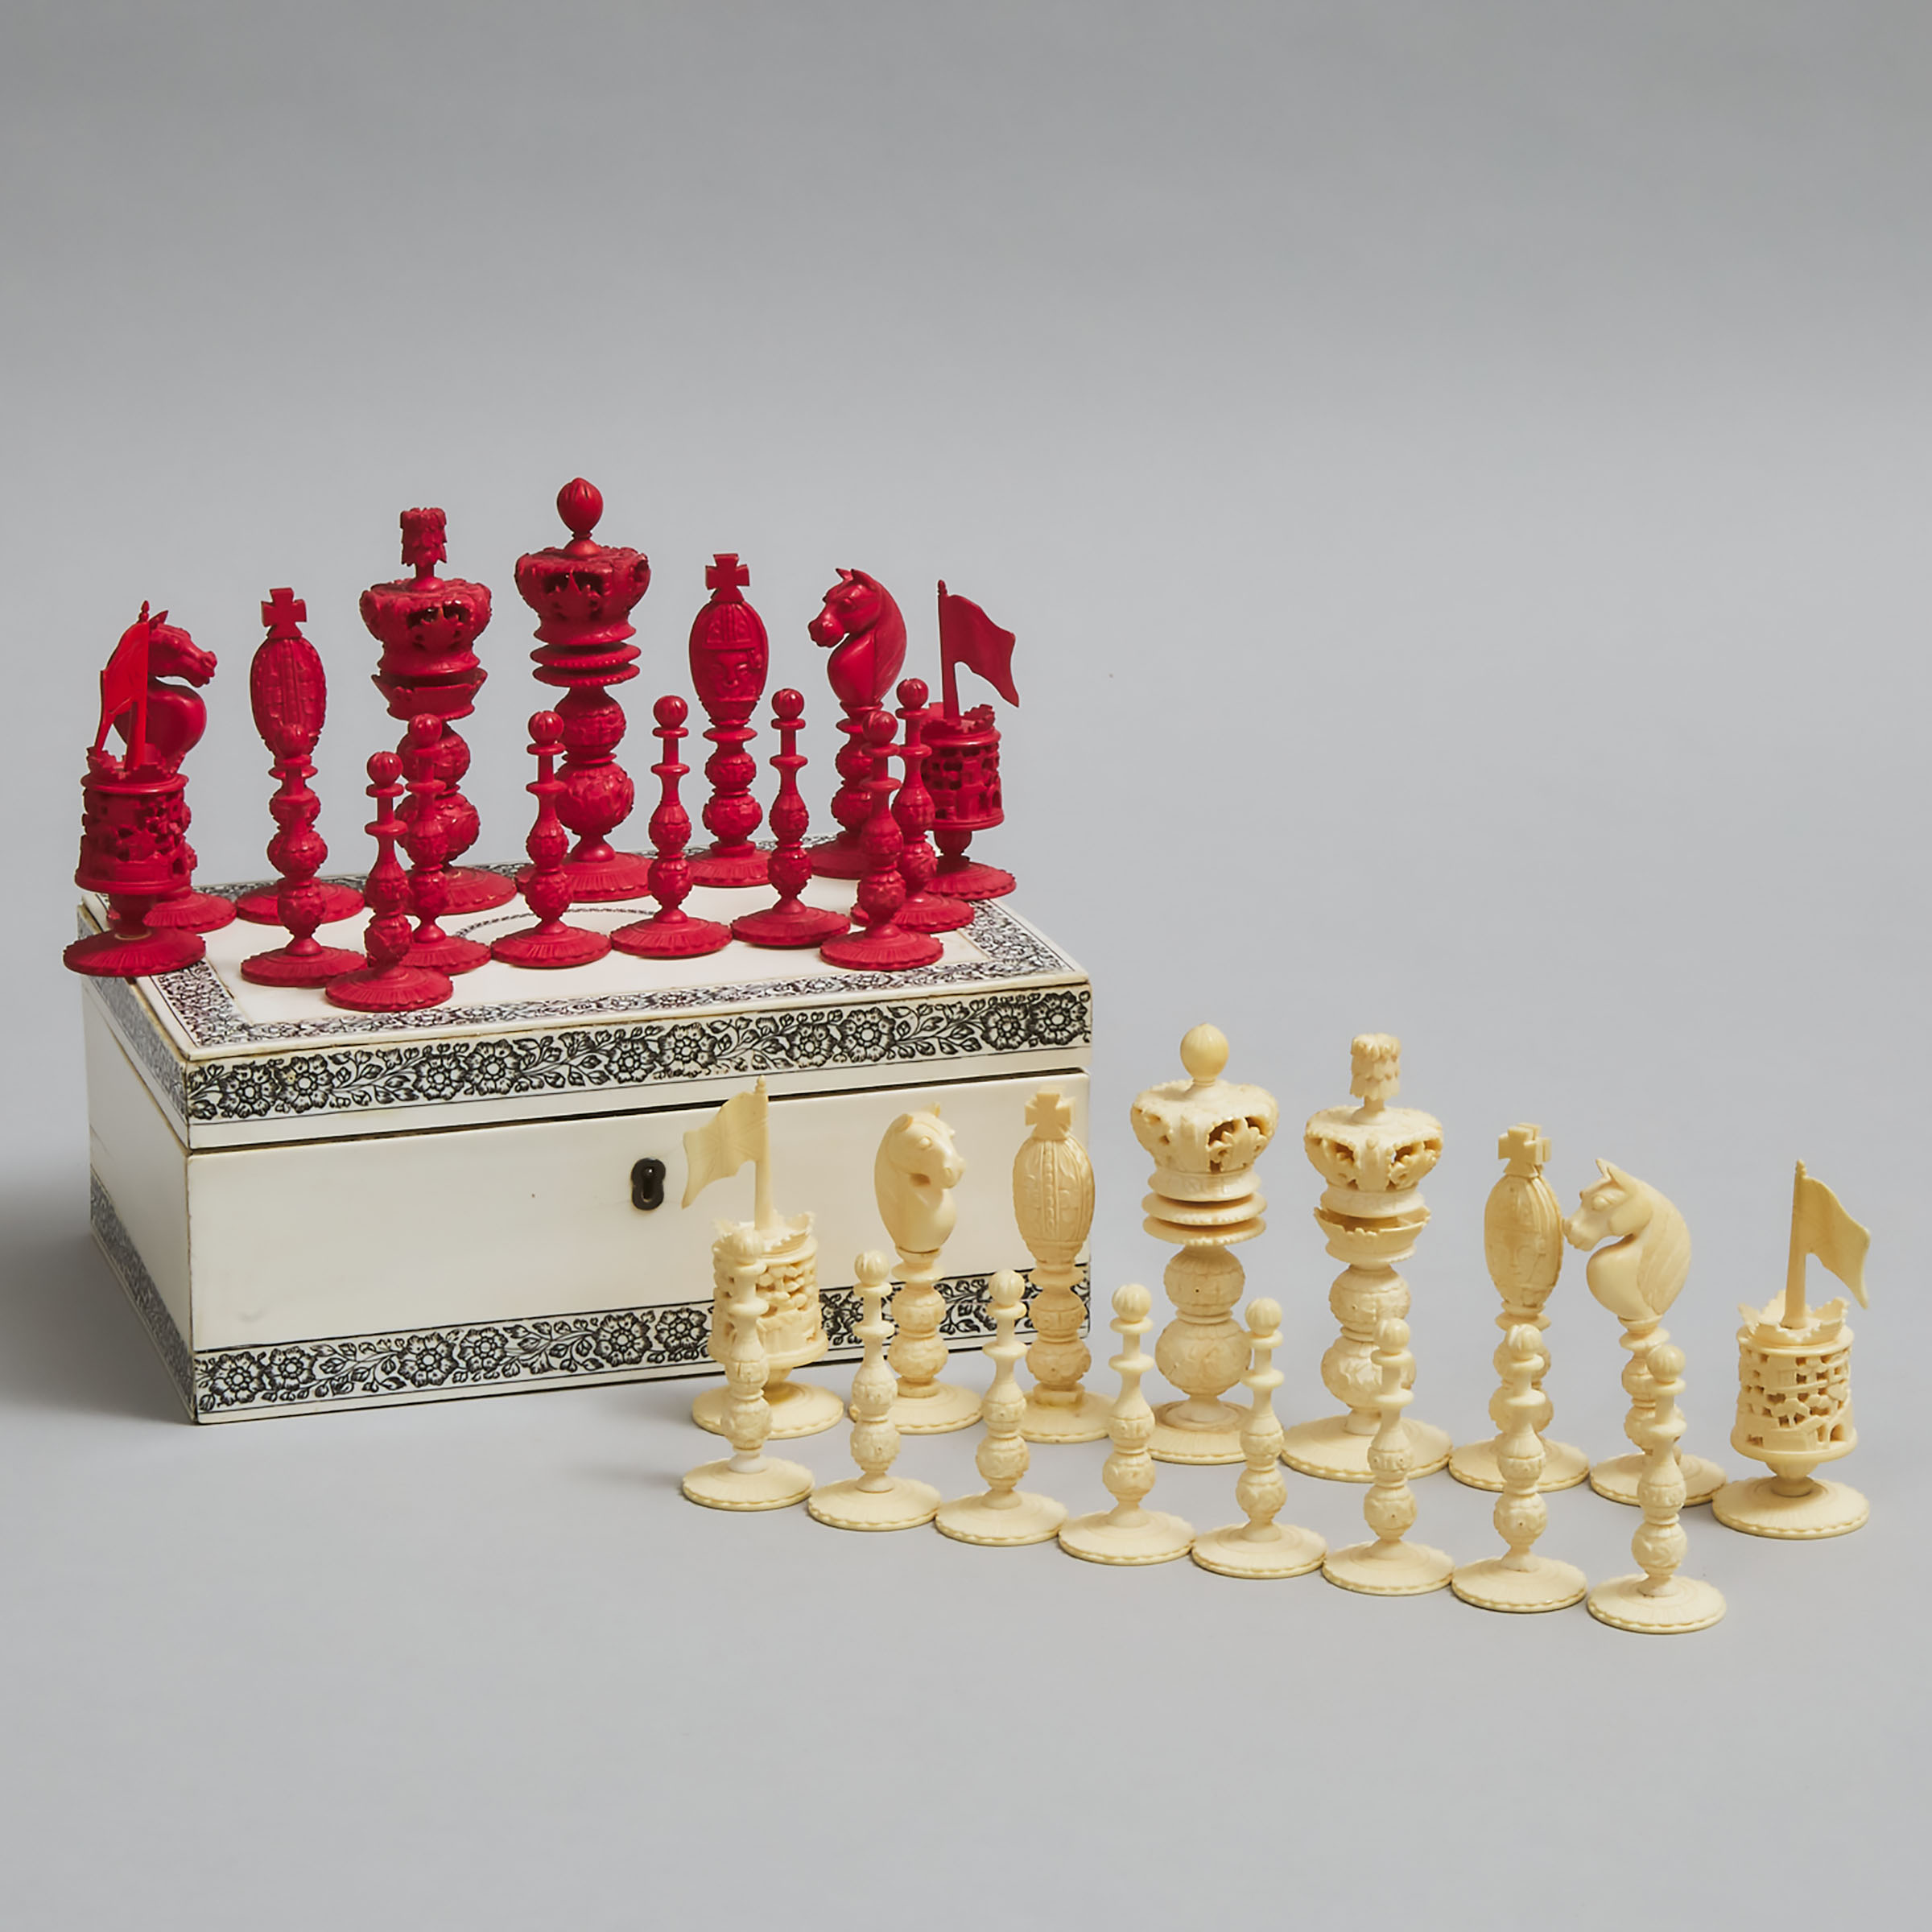 Vizagapatam Cased Ivory Chess Set, 19th/early 20th century